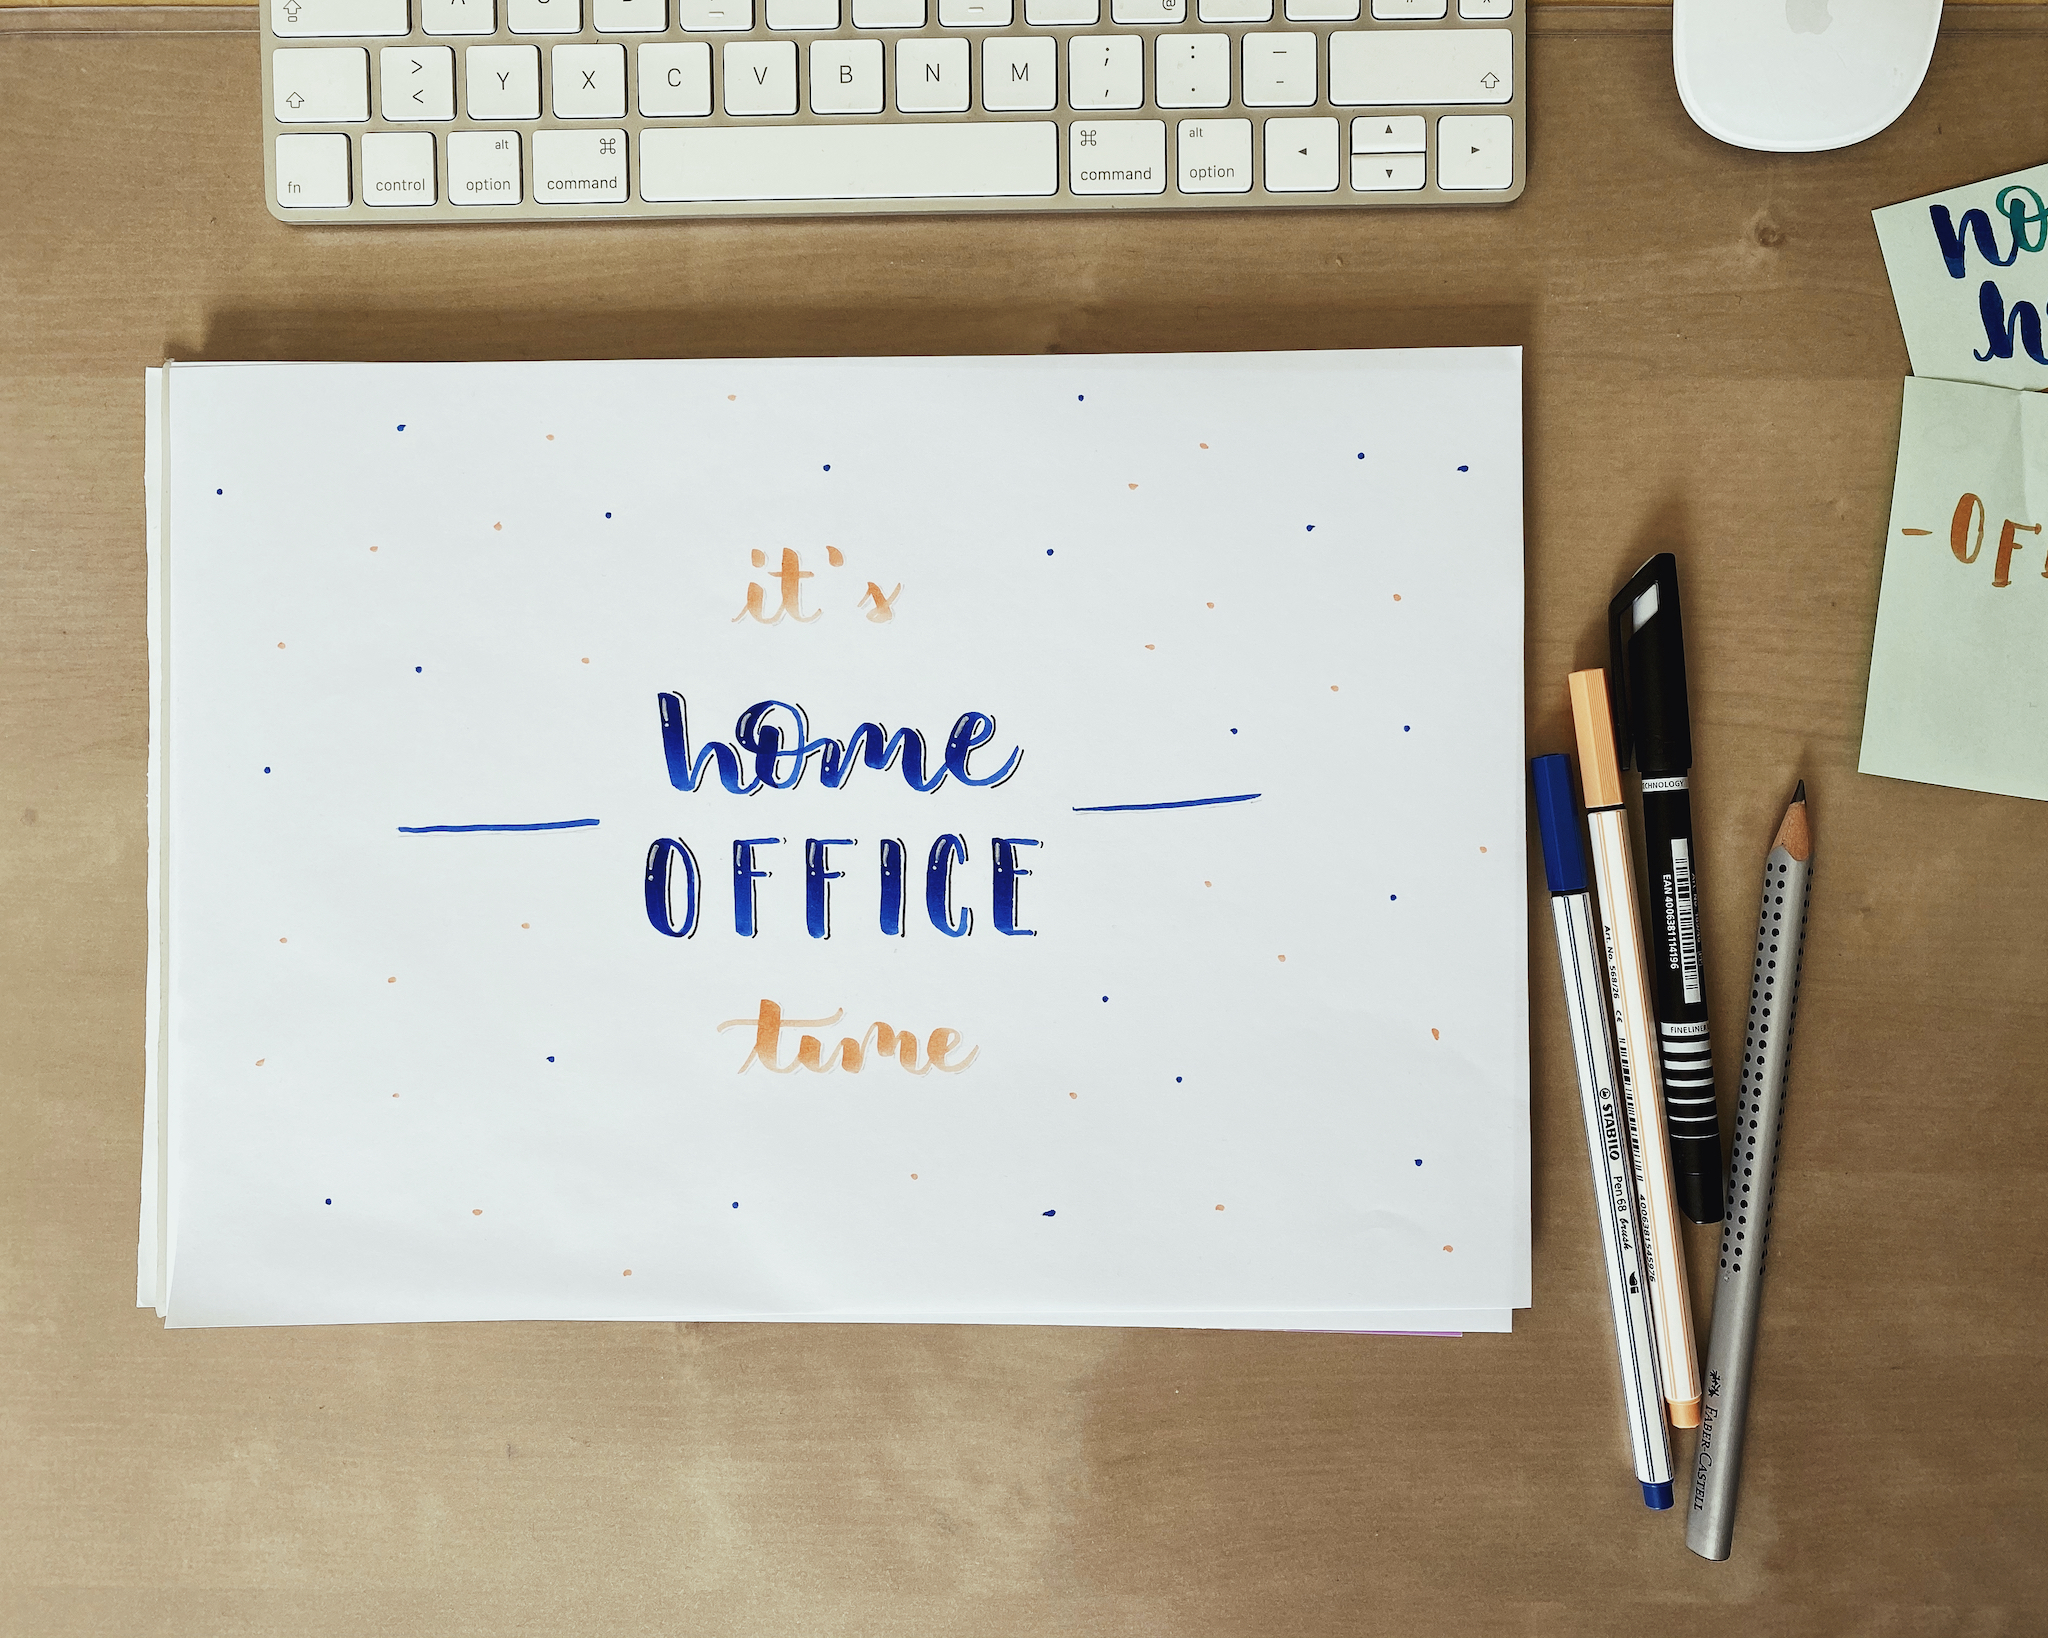 Lettering next to a keyboard which says it's home office time